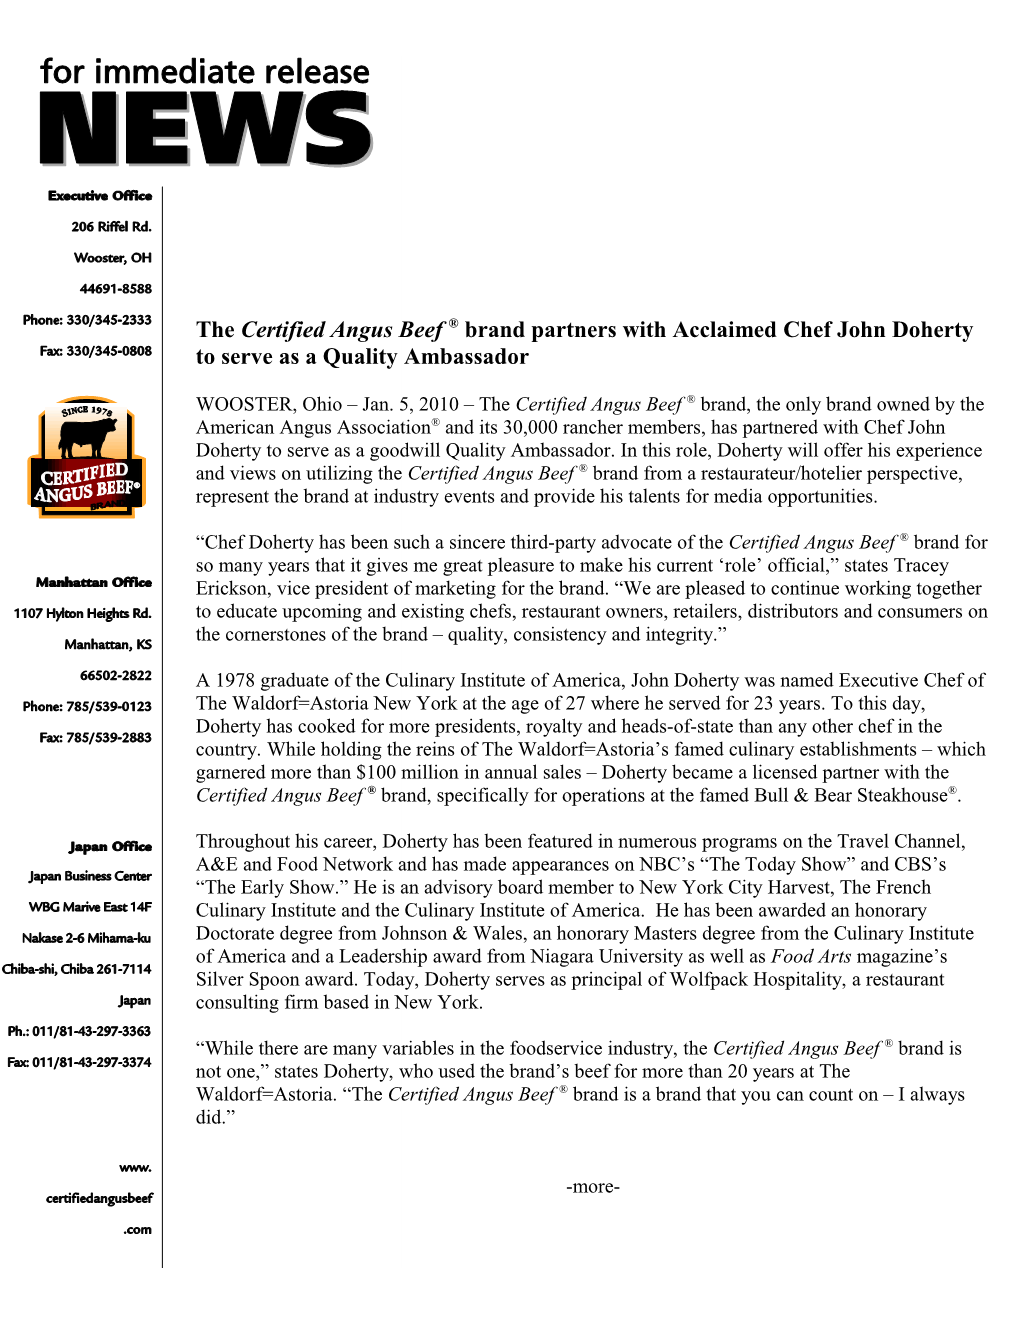 The Certified Angus Beef Brand Partners with Acclaimed Chef John Doherty